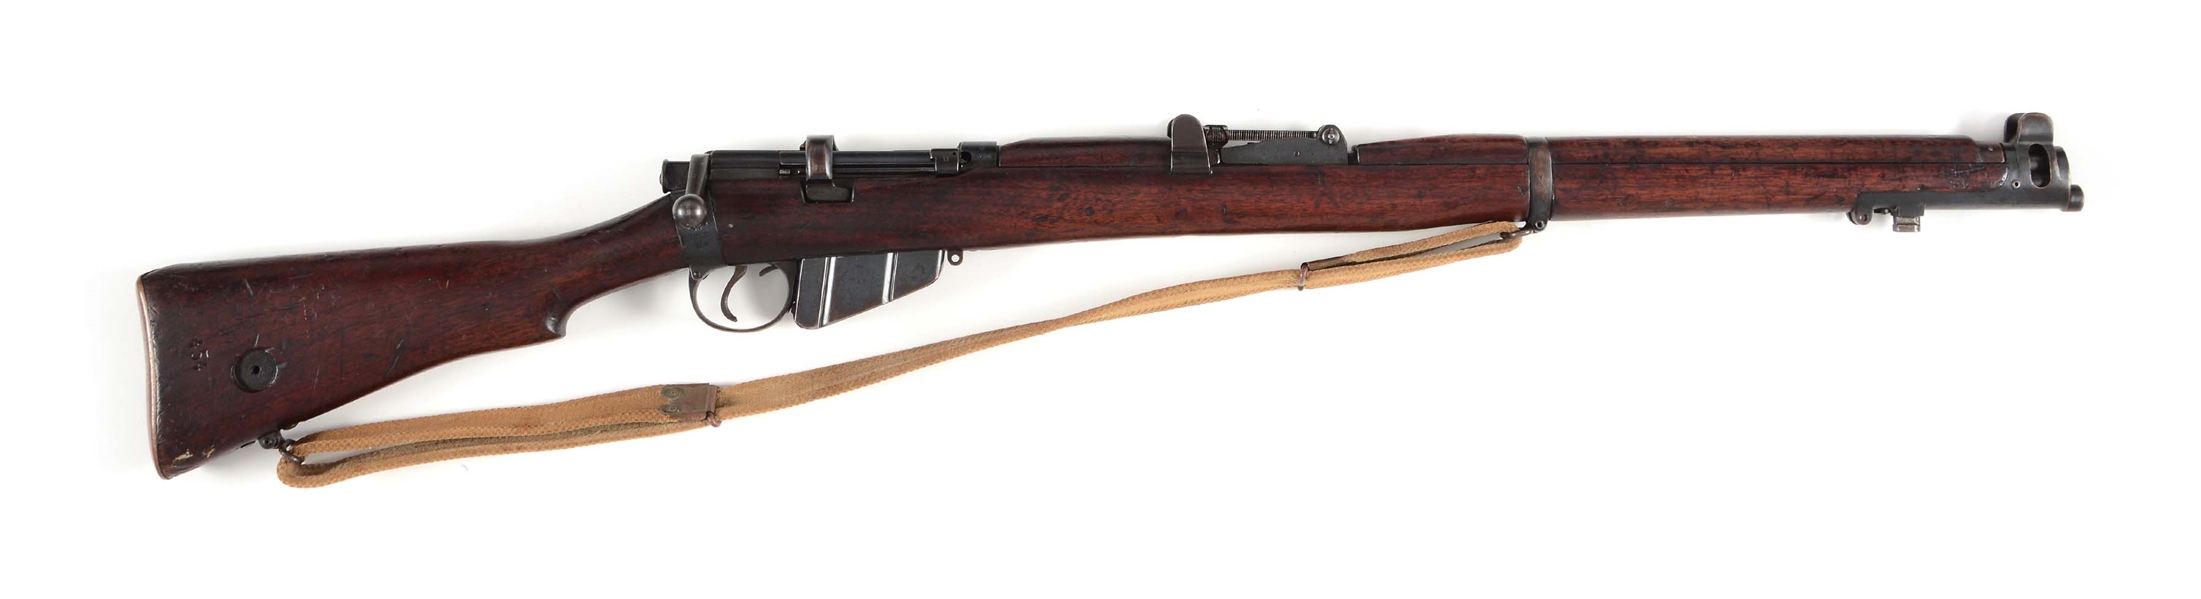 (C) LEE-ENFIELD MARK 111 DATED 1918 MILITARY RIFLE